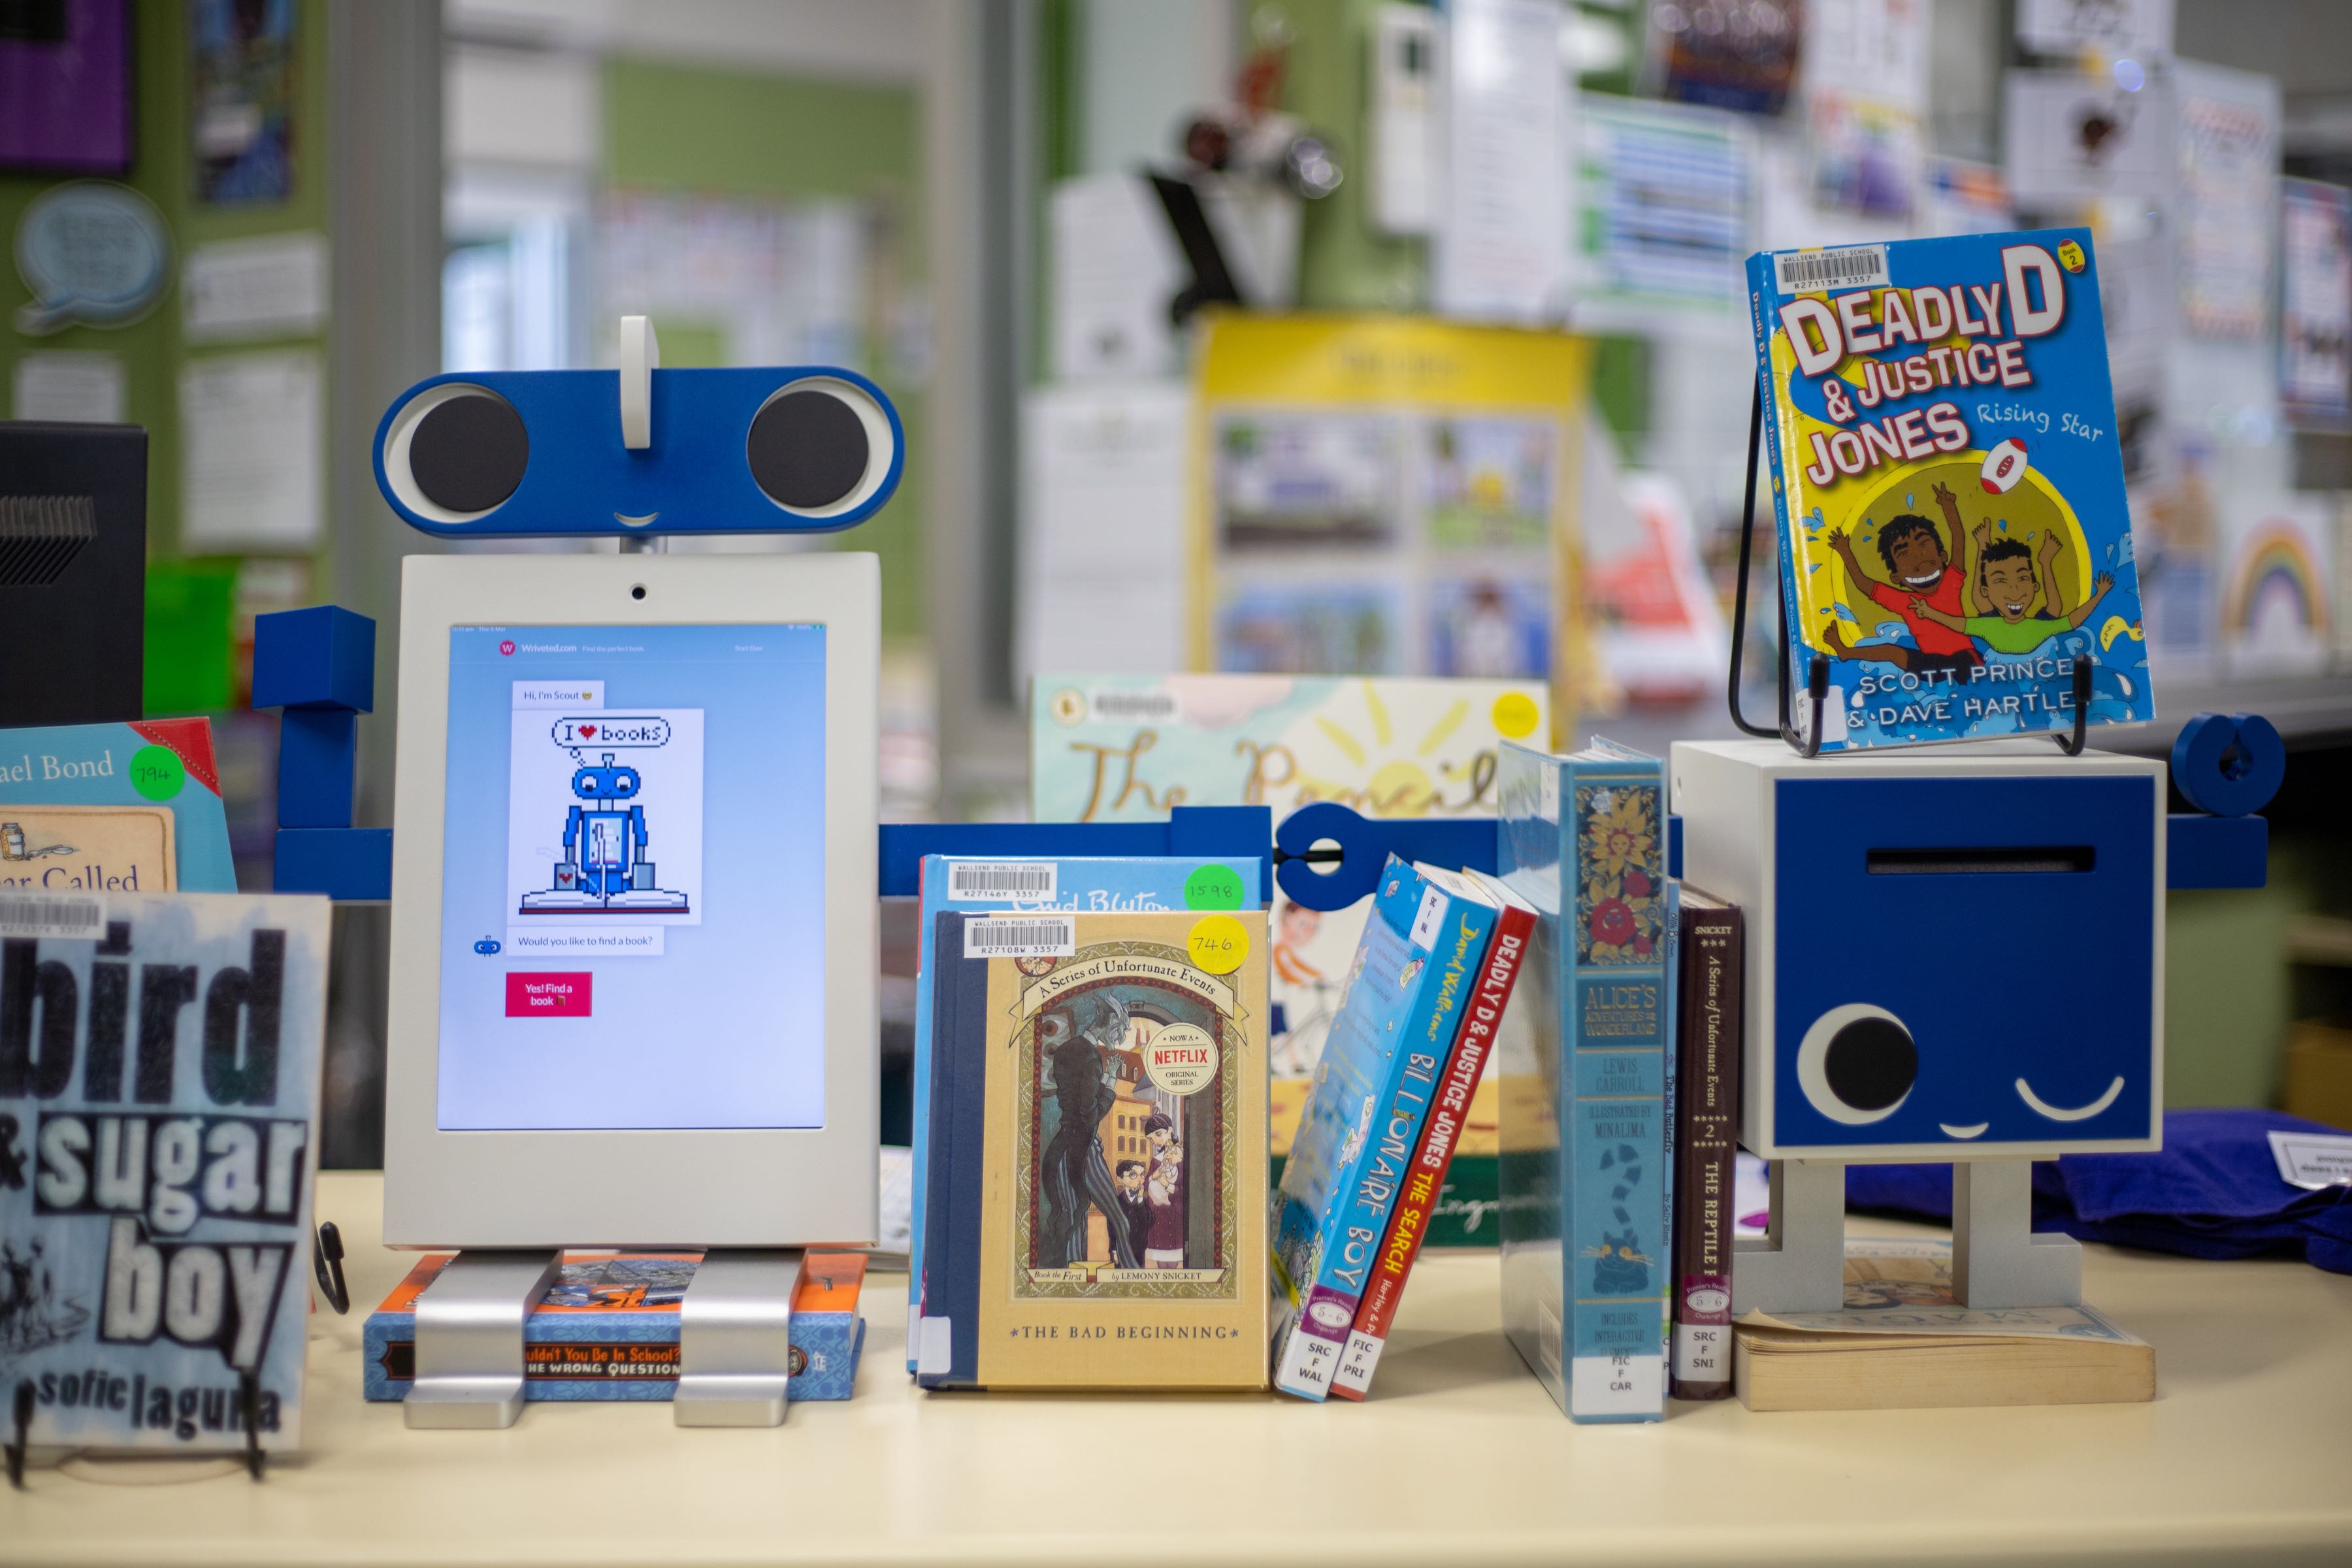 A Huey the Bookbot kiosk in a school library with an assortment of children's books